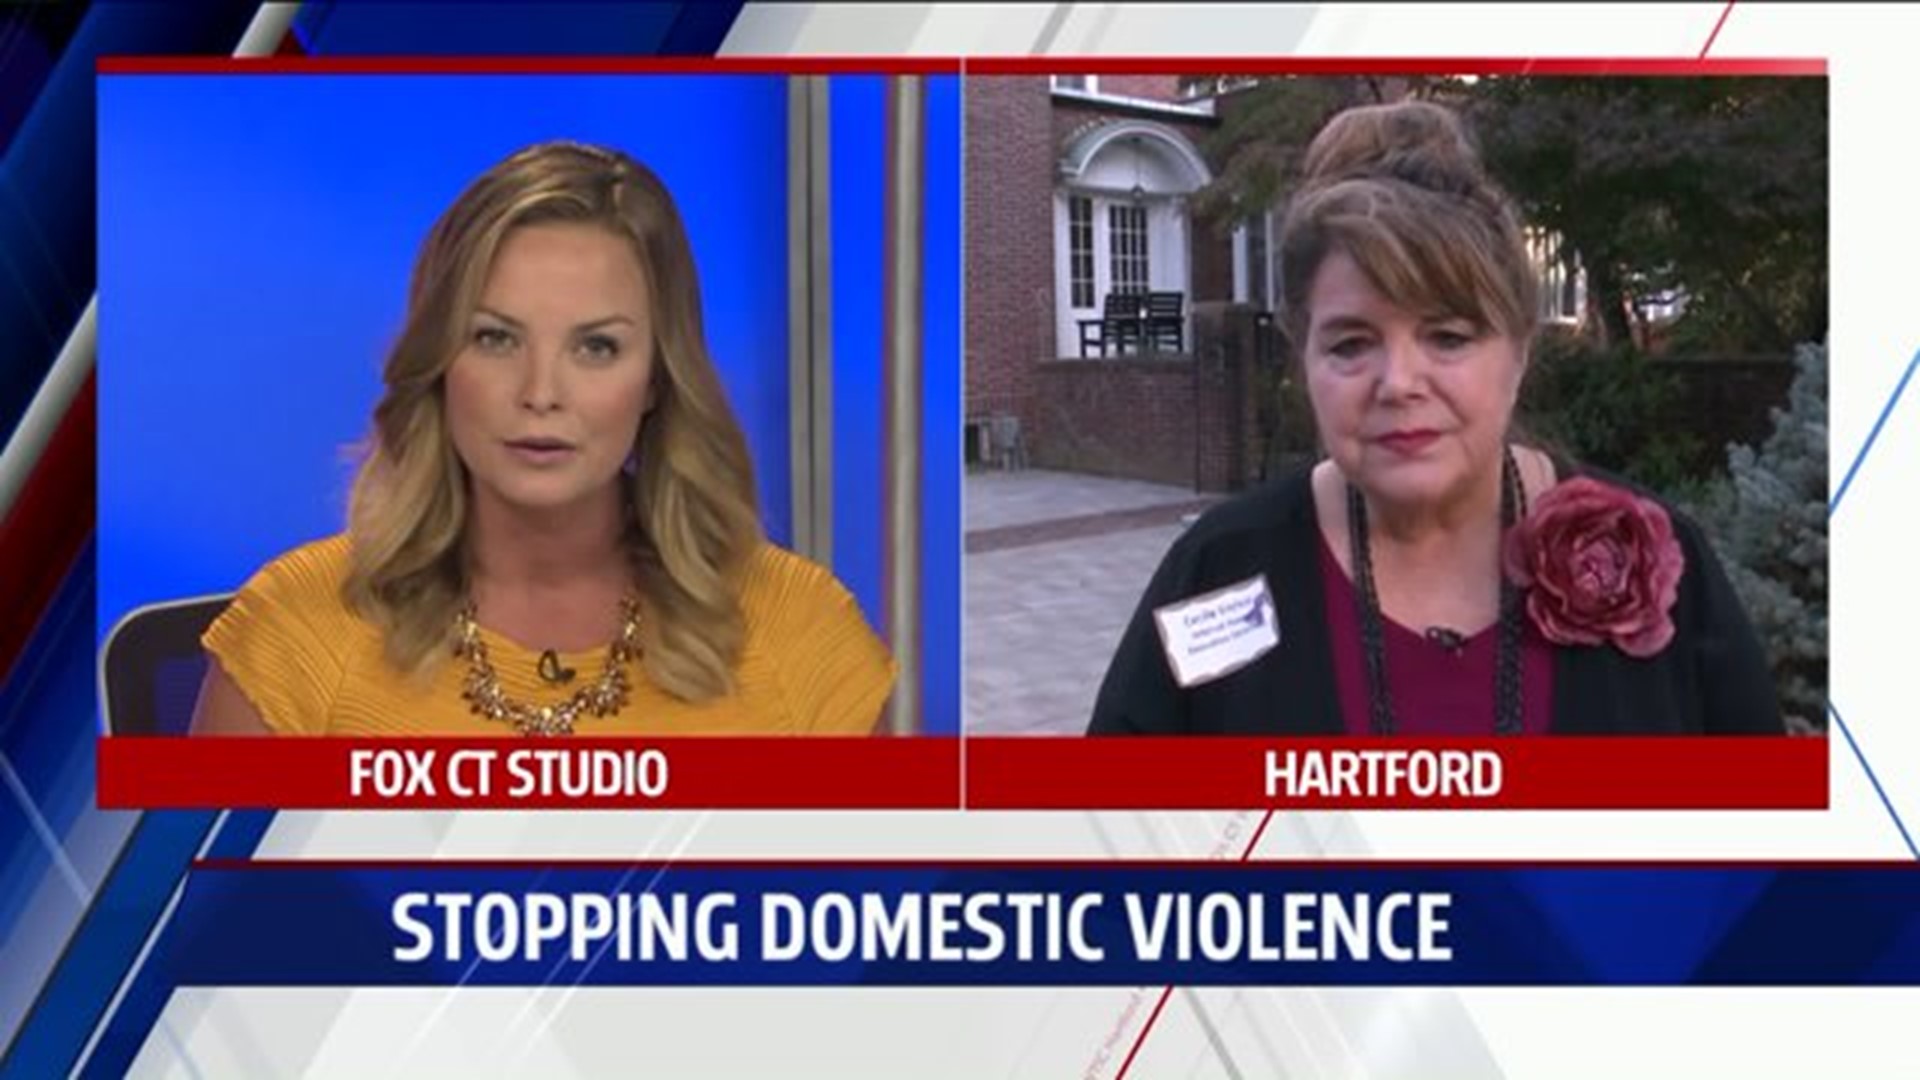 Interview: ending domestic violence